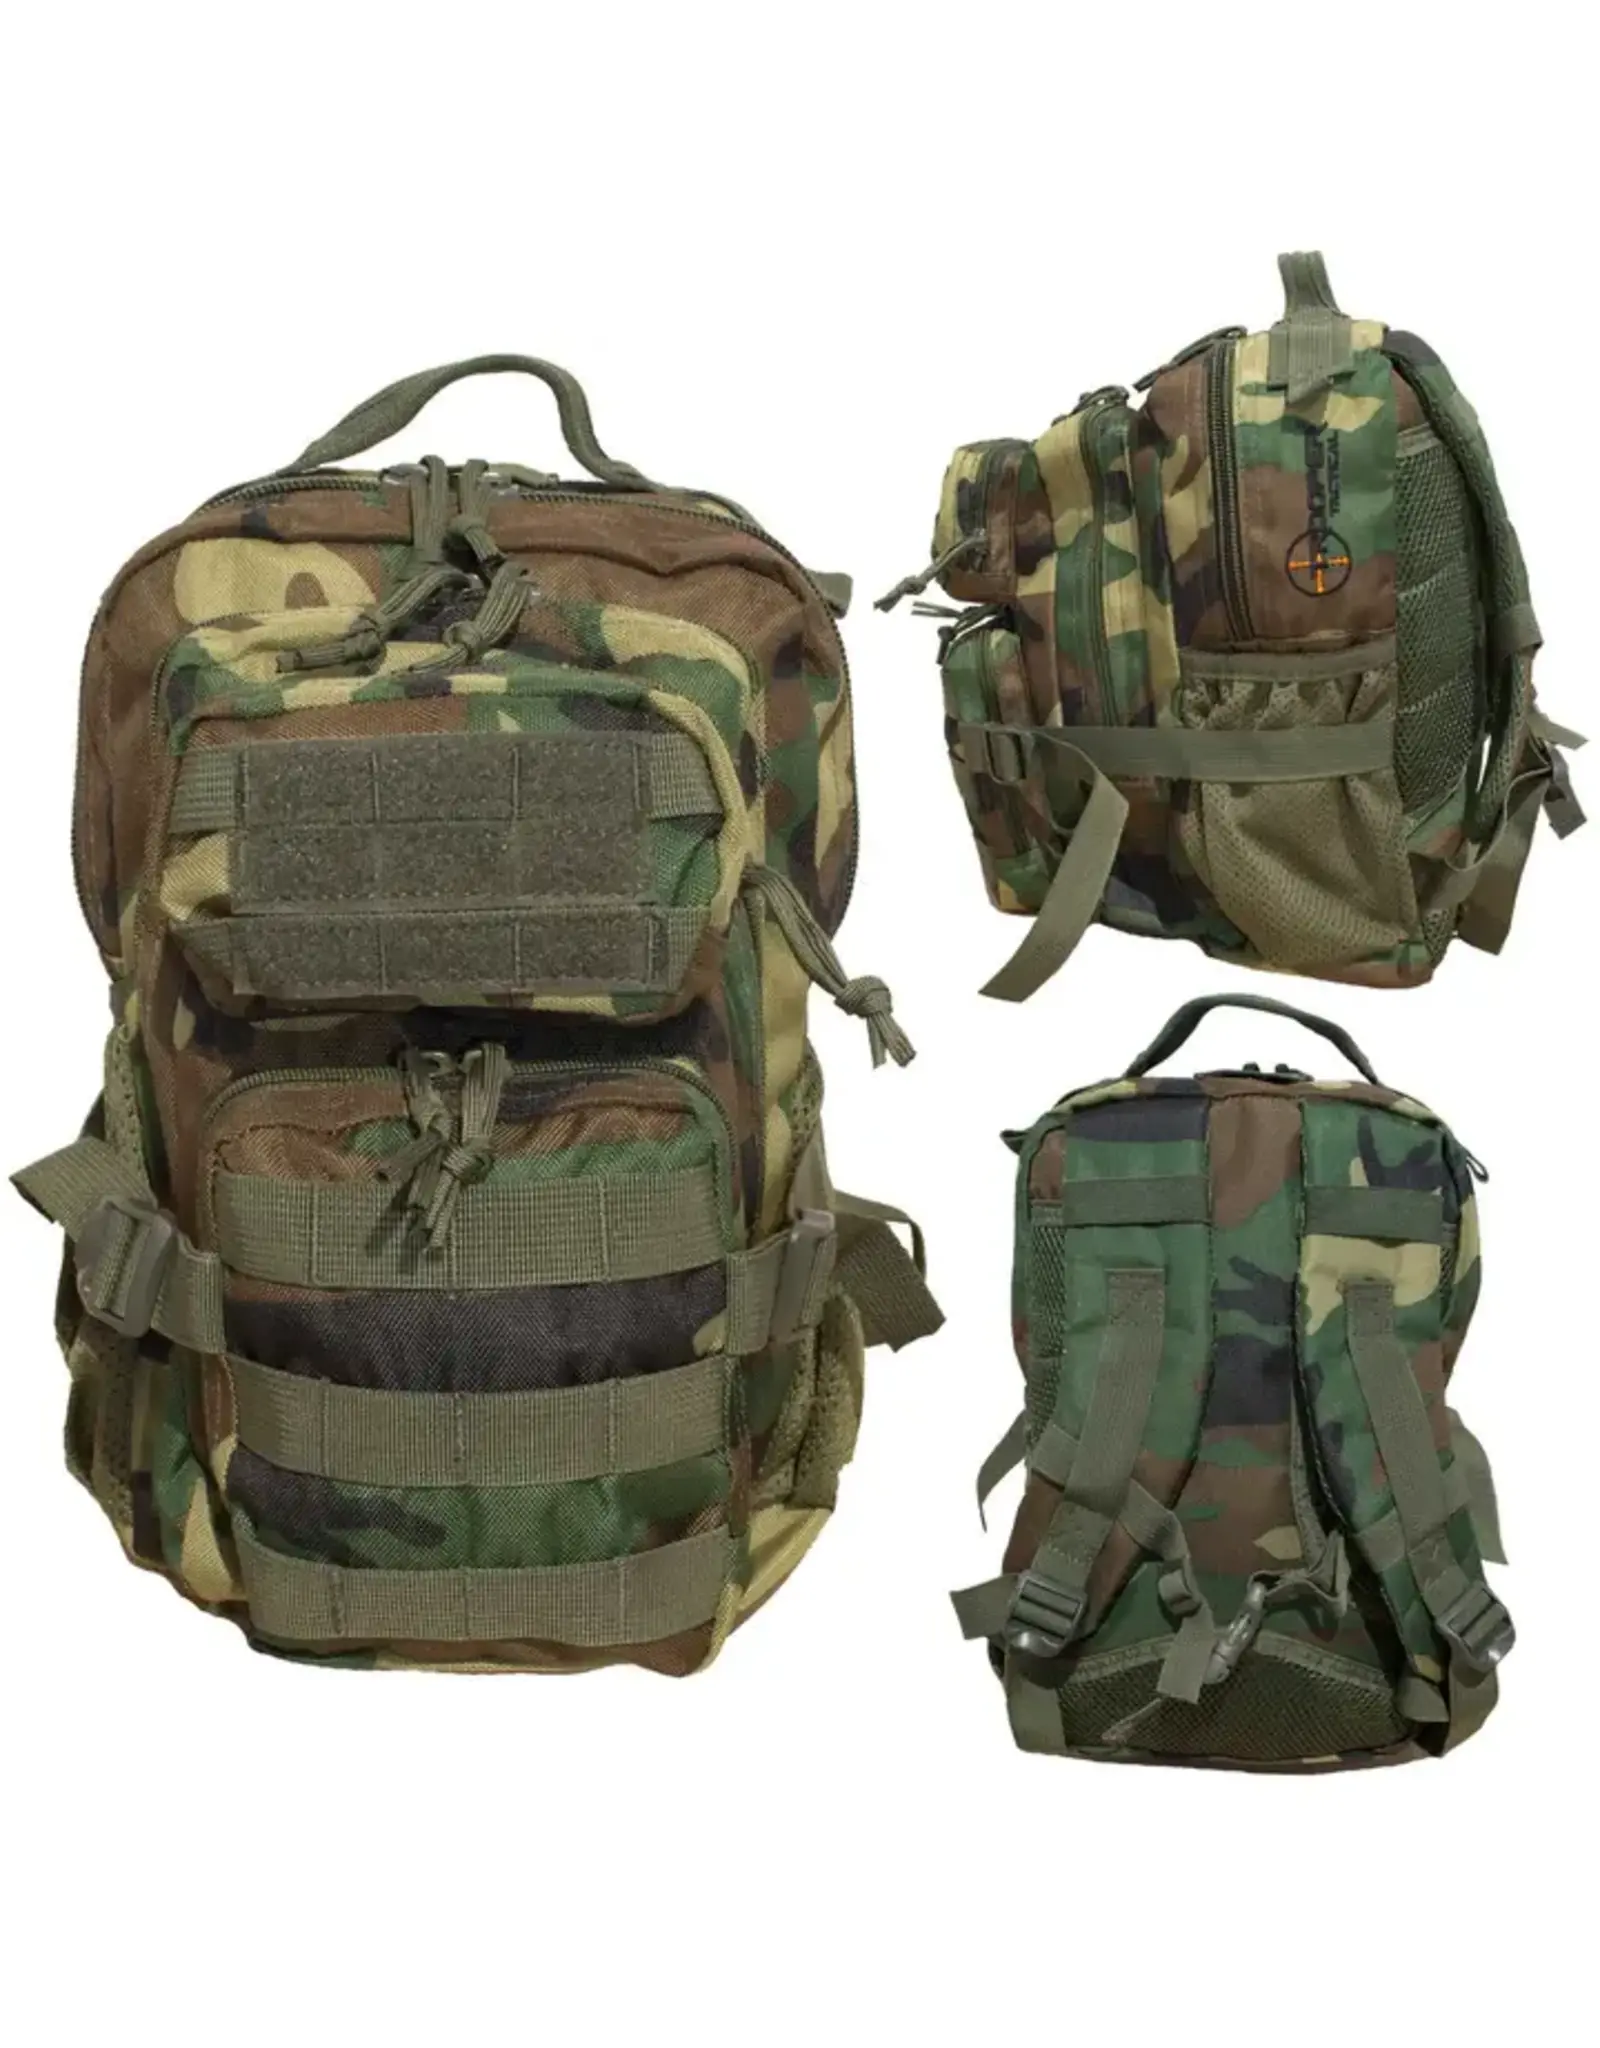 Youth Tactical Backpack